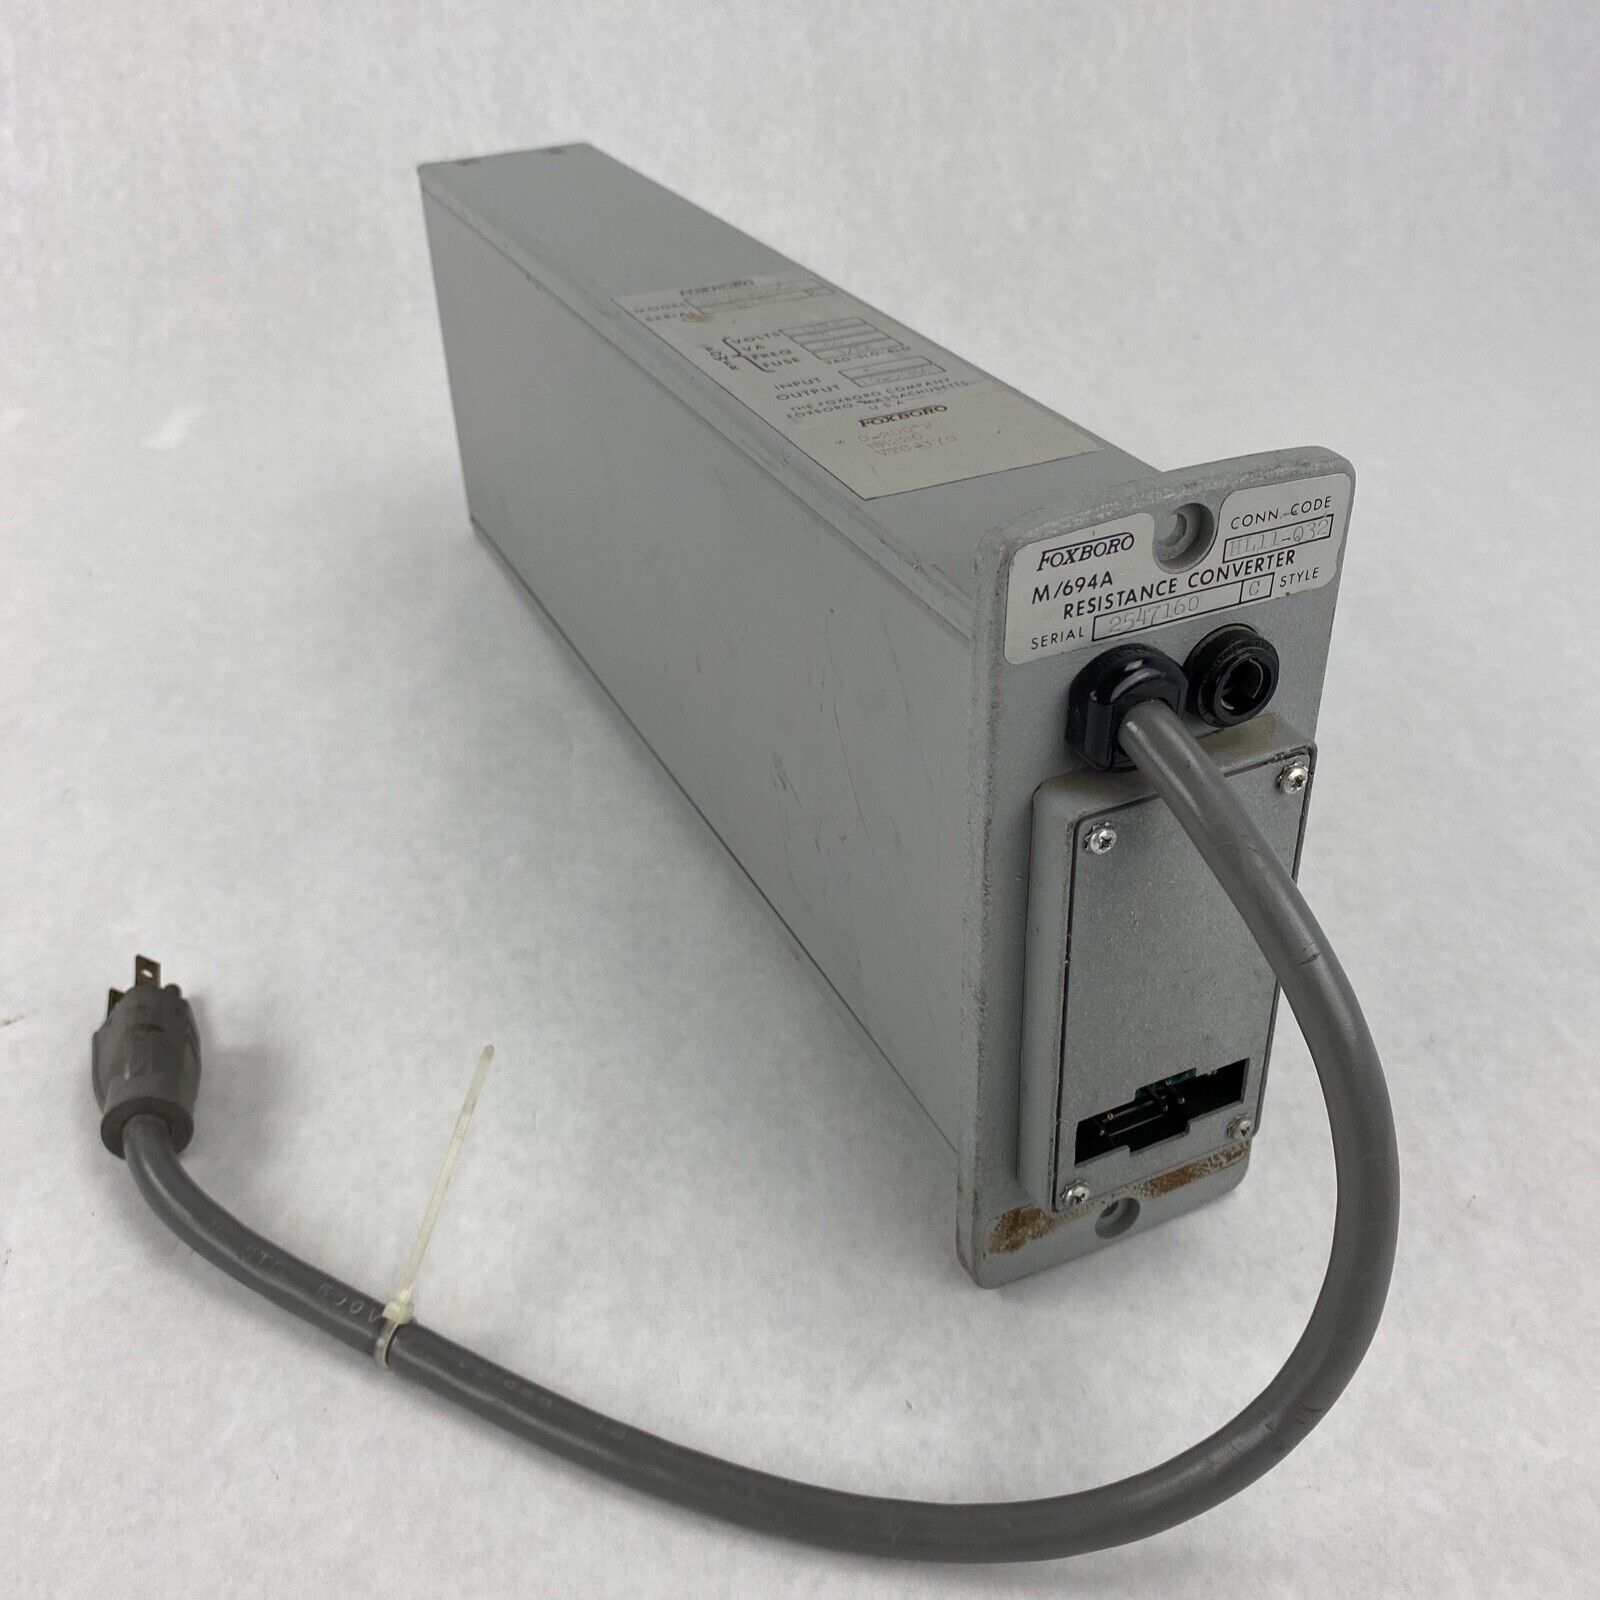 Foxboro 694AC-0AW-6 M/694A Resistance Converter Missing Side Panel